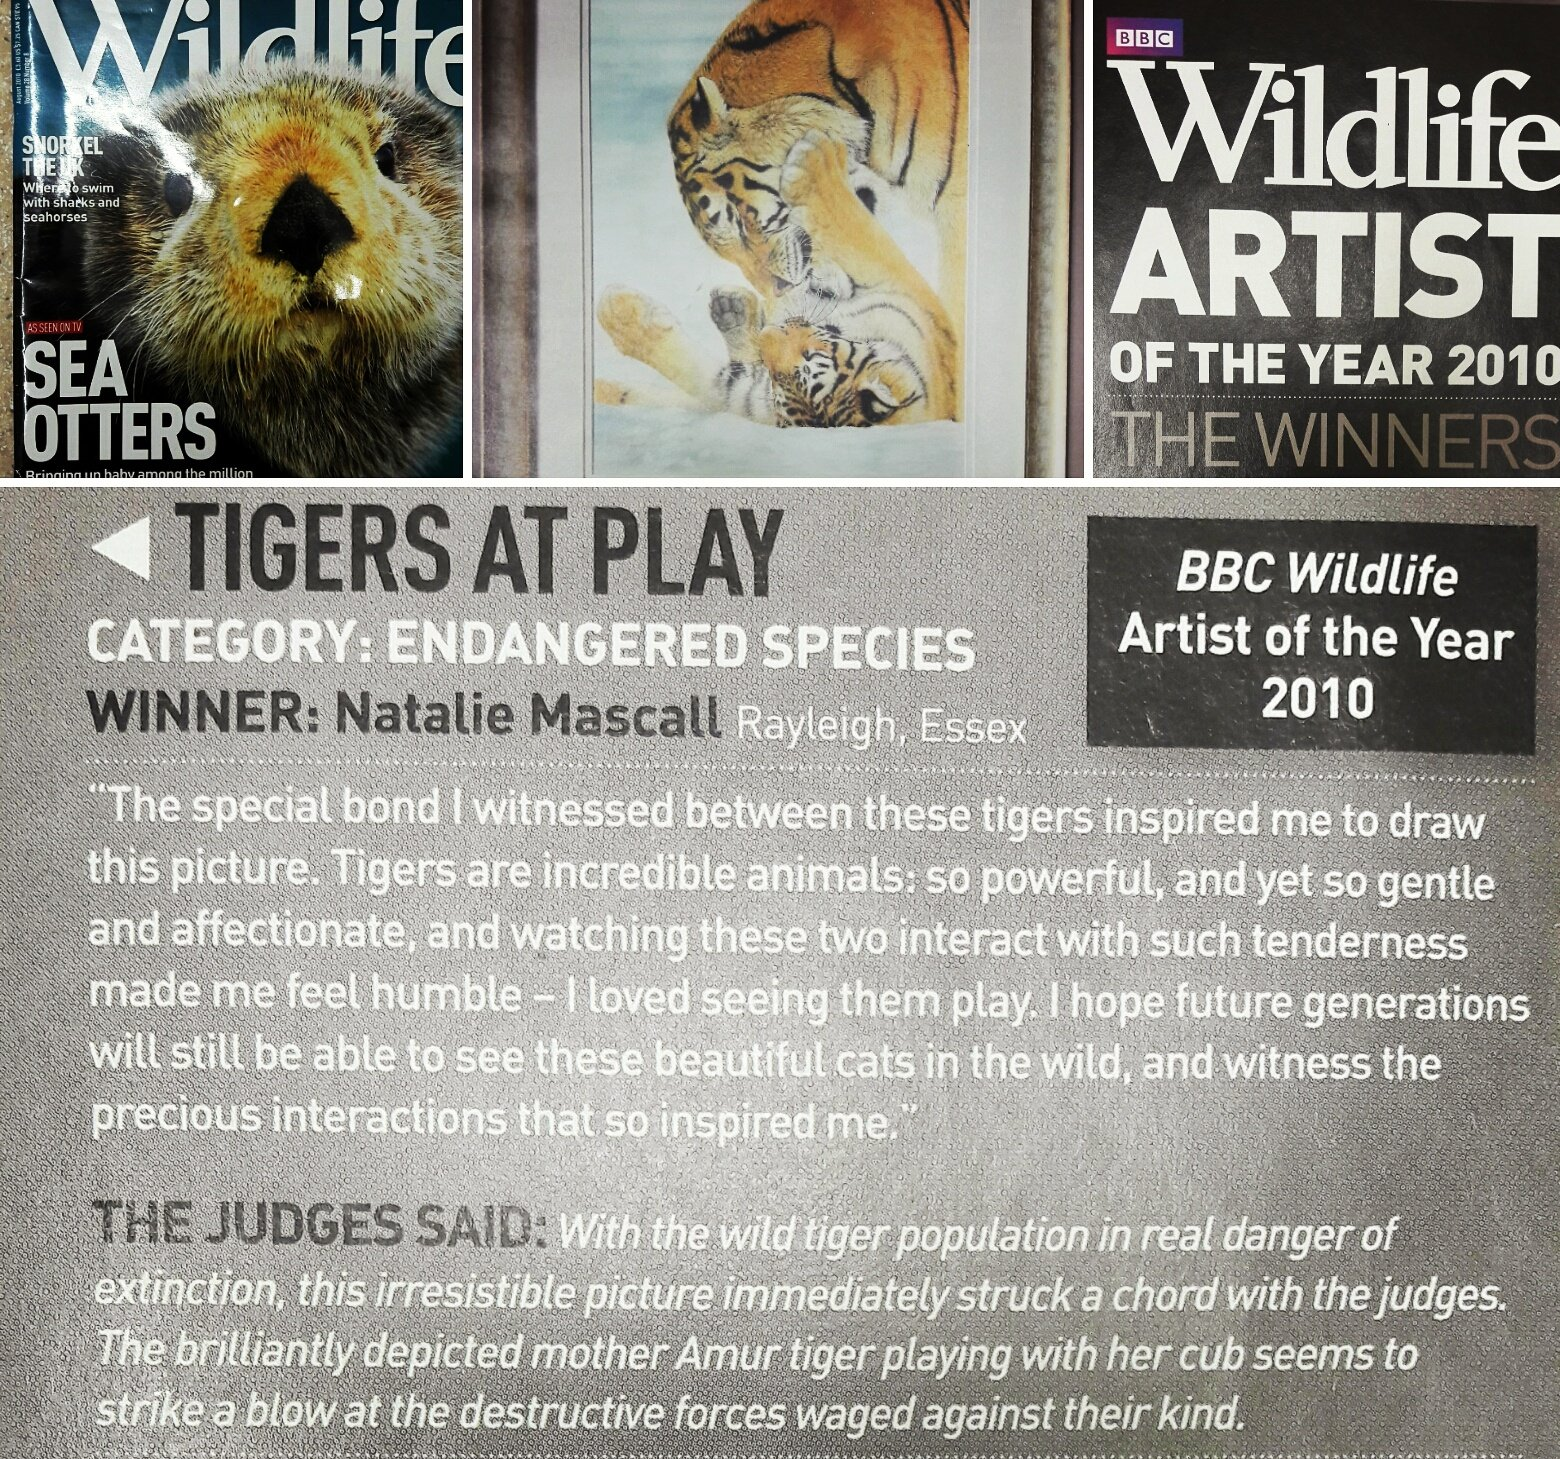 endangered species category winner and overall competition winner Natalie Mascall, wildlife artist of the year, BBC, BBC Wildlife artist of the year, Natalie was named wildlife artist of the year with tigers at play, bbc wildlife artist of the year,